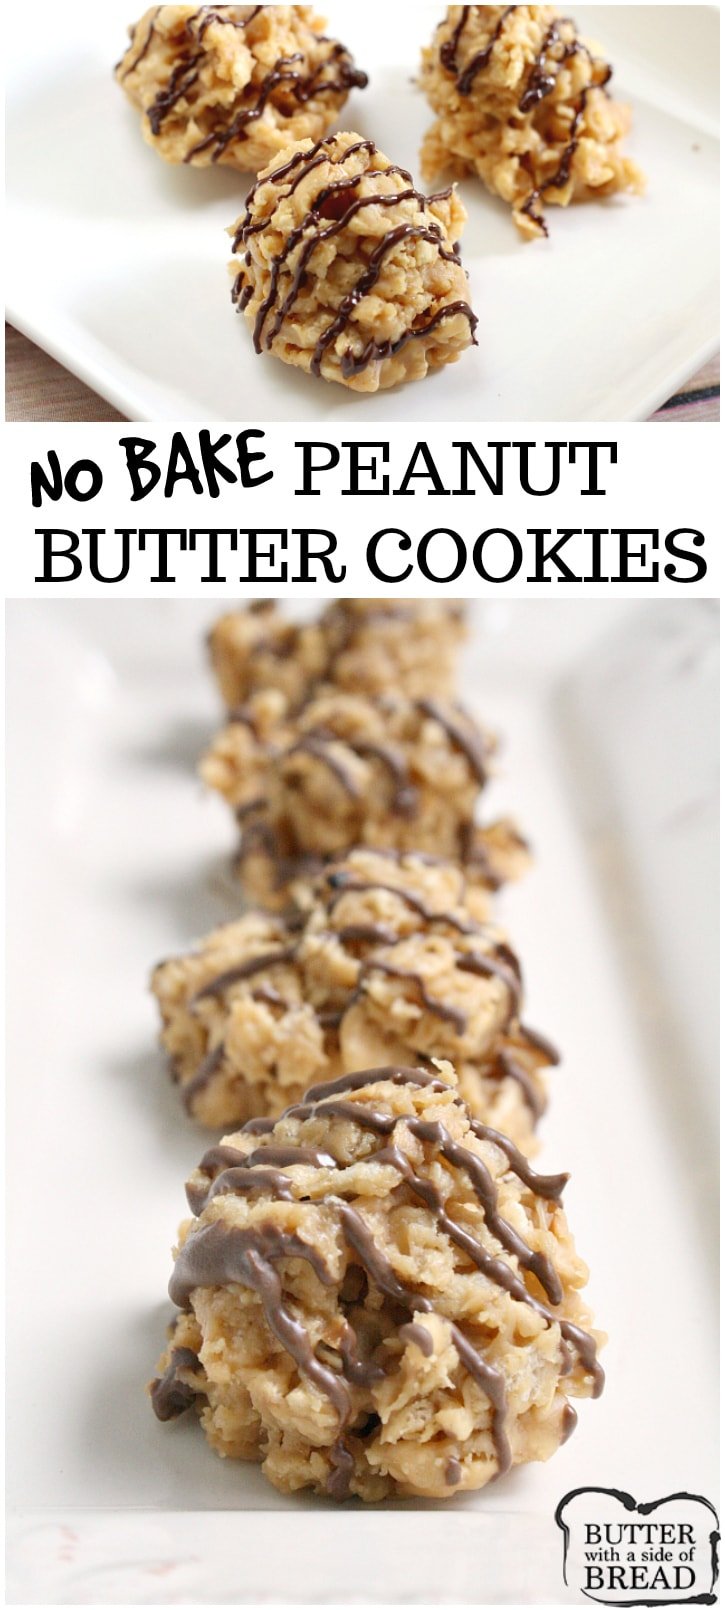 No Bake Peanut Butter Cookies are crunchy, sweet and full of flavor and they only take a few minutes start to finish to make!